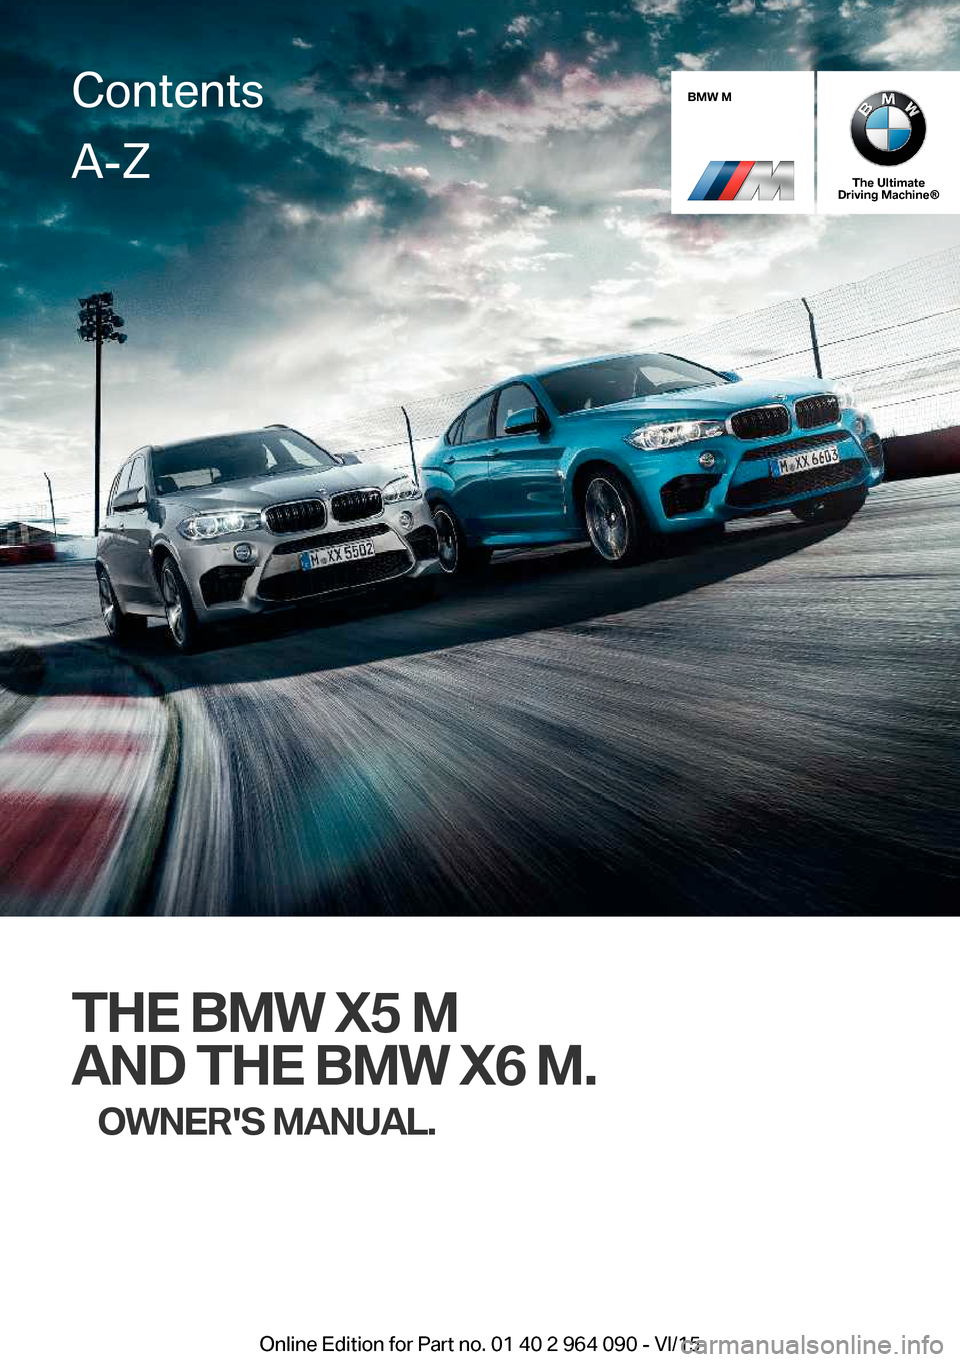 BMW X5M 2016 F85 Owners Manual BMW M
The Ultimate
Driving Machine®
THE BMW X5 M
AND THE BMW X6 M. OWNERS MANUAL.
ContentsA-Z
Online Edition for Part no. 01 40 2 964 090 - VI/15   